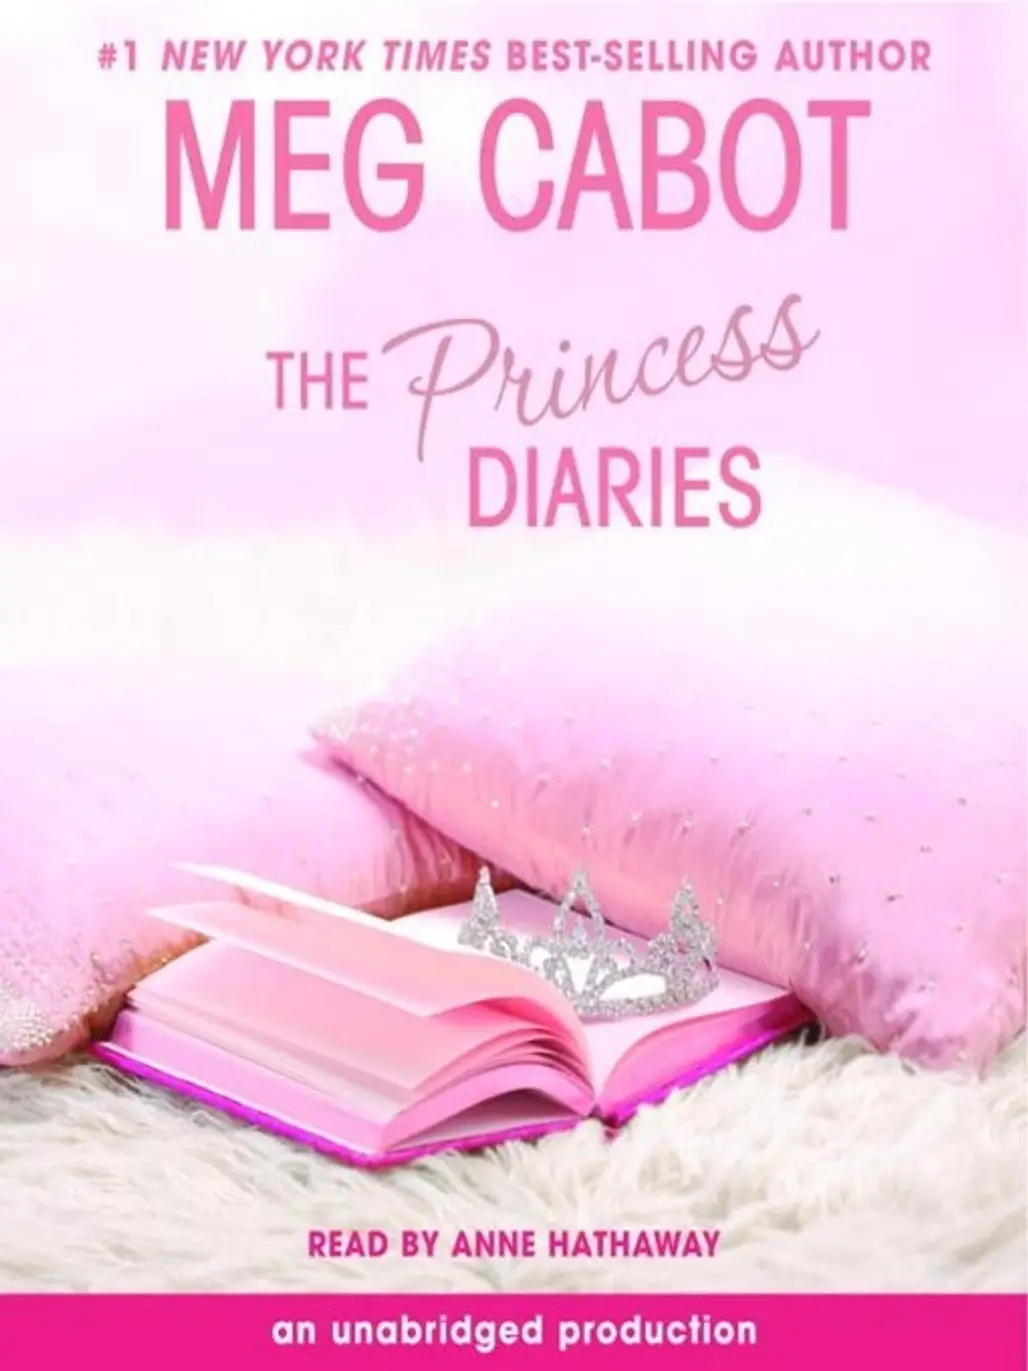 The Princess Diaries Series by Meg Cabot